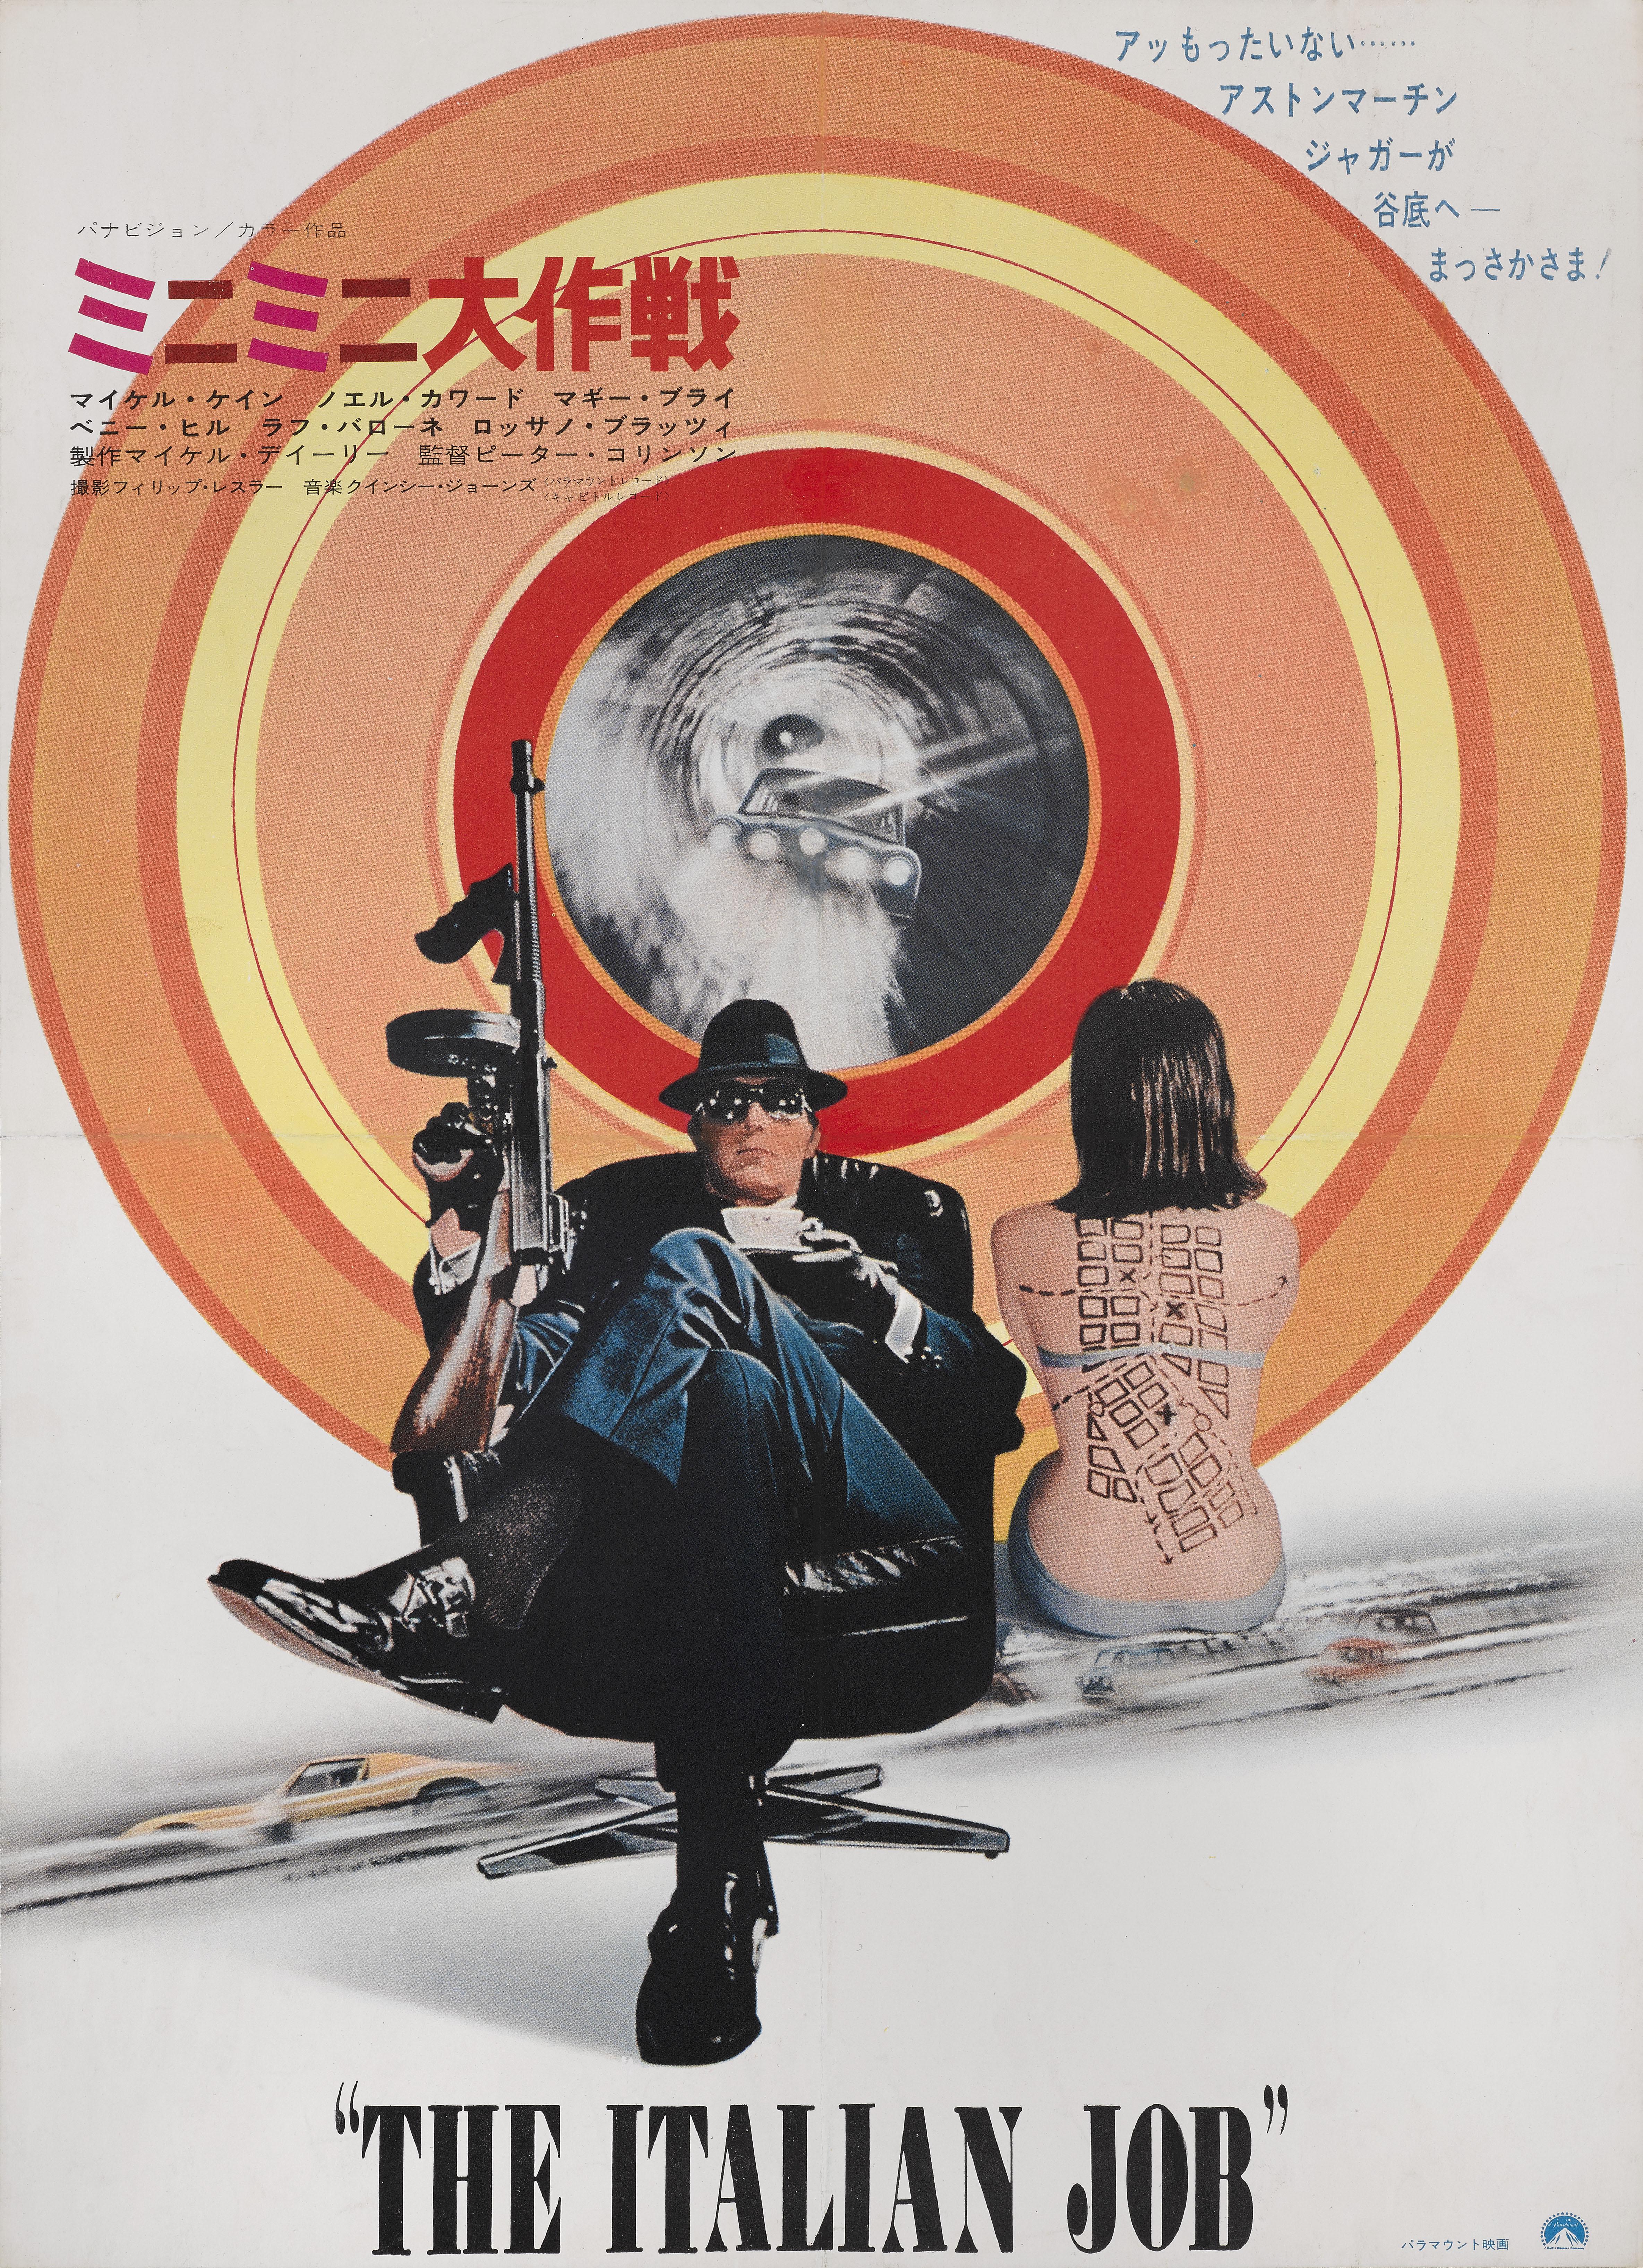 Original Japanese program cover for Michael Caine and Noel Coward's 1969 comic, crime caper about a plan to steal a gold shipment. The film was released one year later in Japan in 1970. This very cool artwork is unique to the films Japanese release.